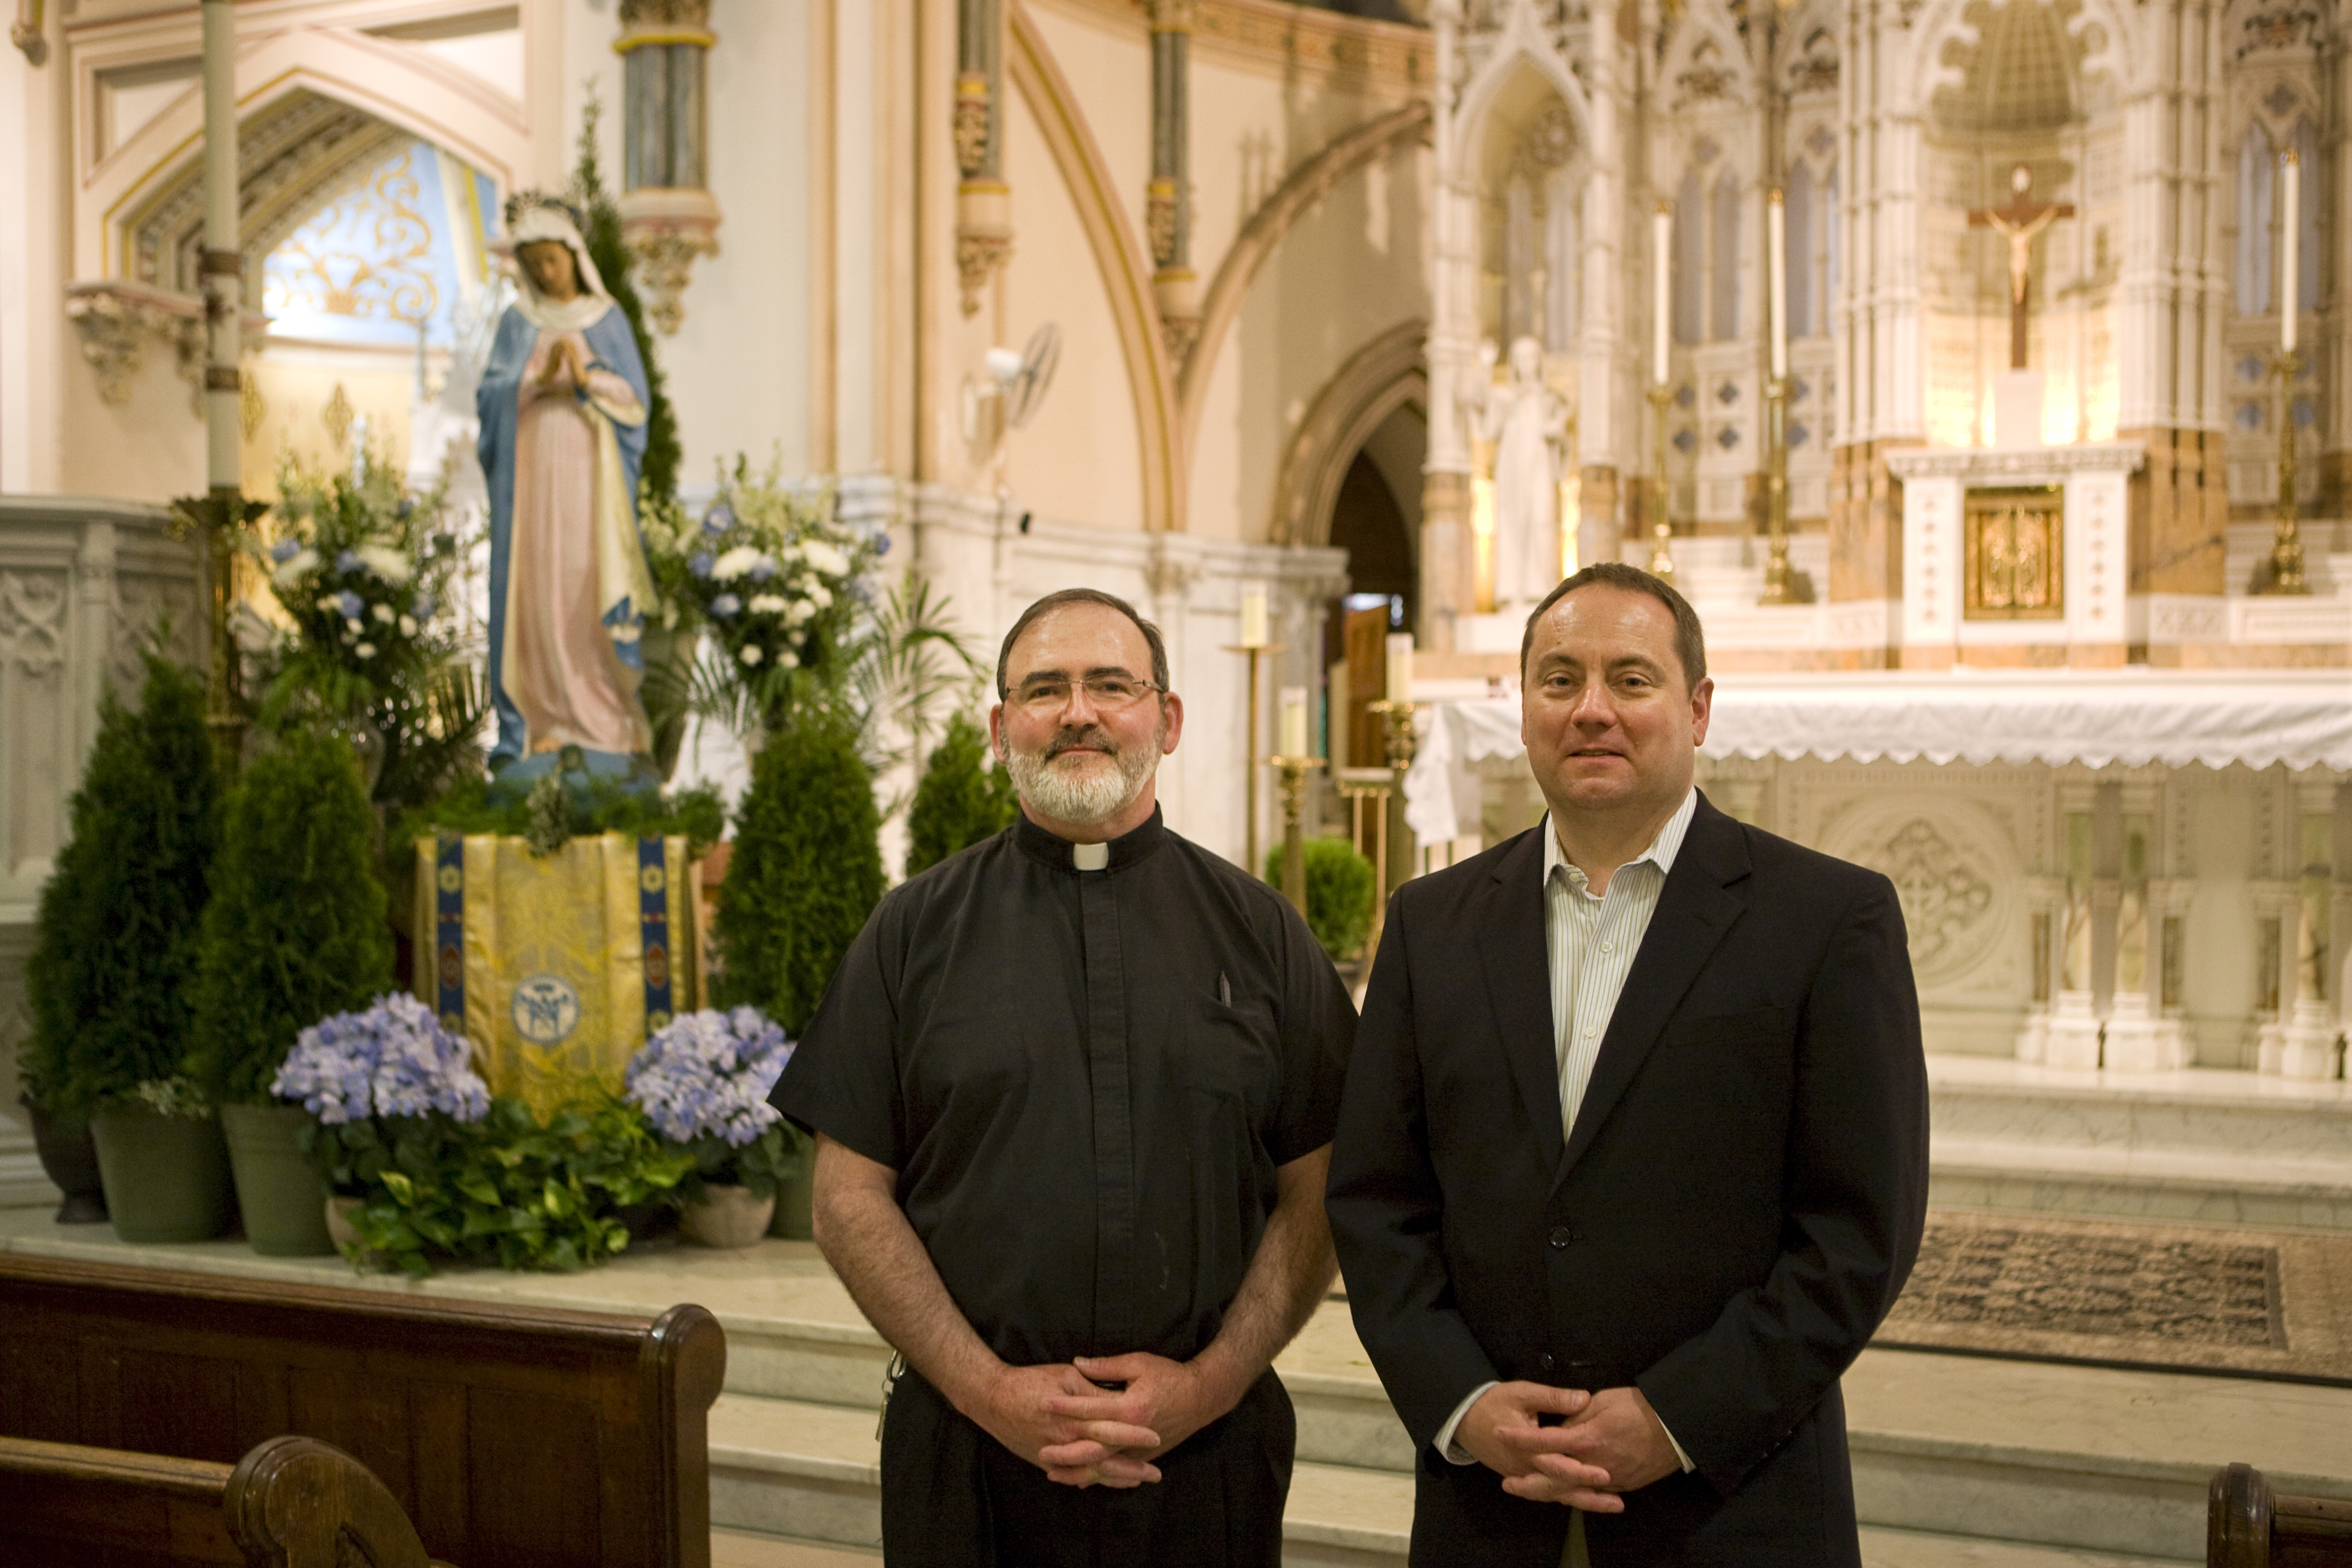 Father Kevin Lawrence (left) and Rich Van Fossen in the sanctuary of Saint John the Baptist, 2015 | Credit: Bradley Maule